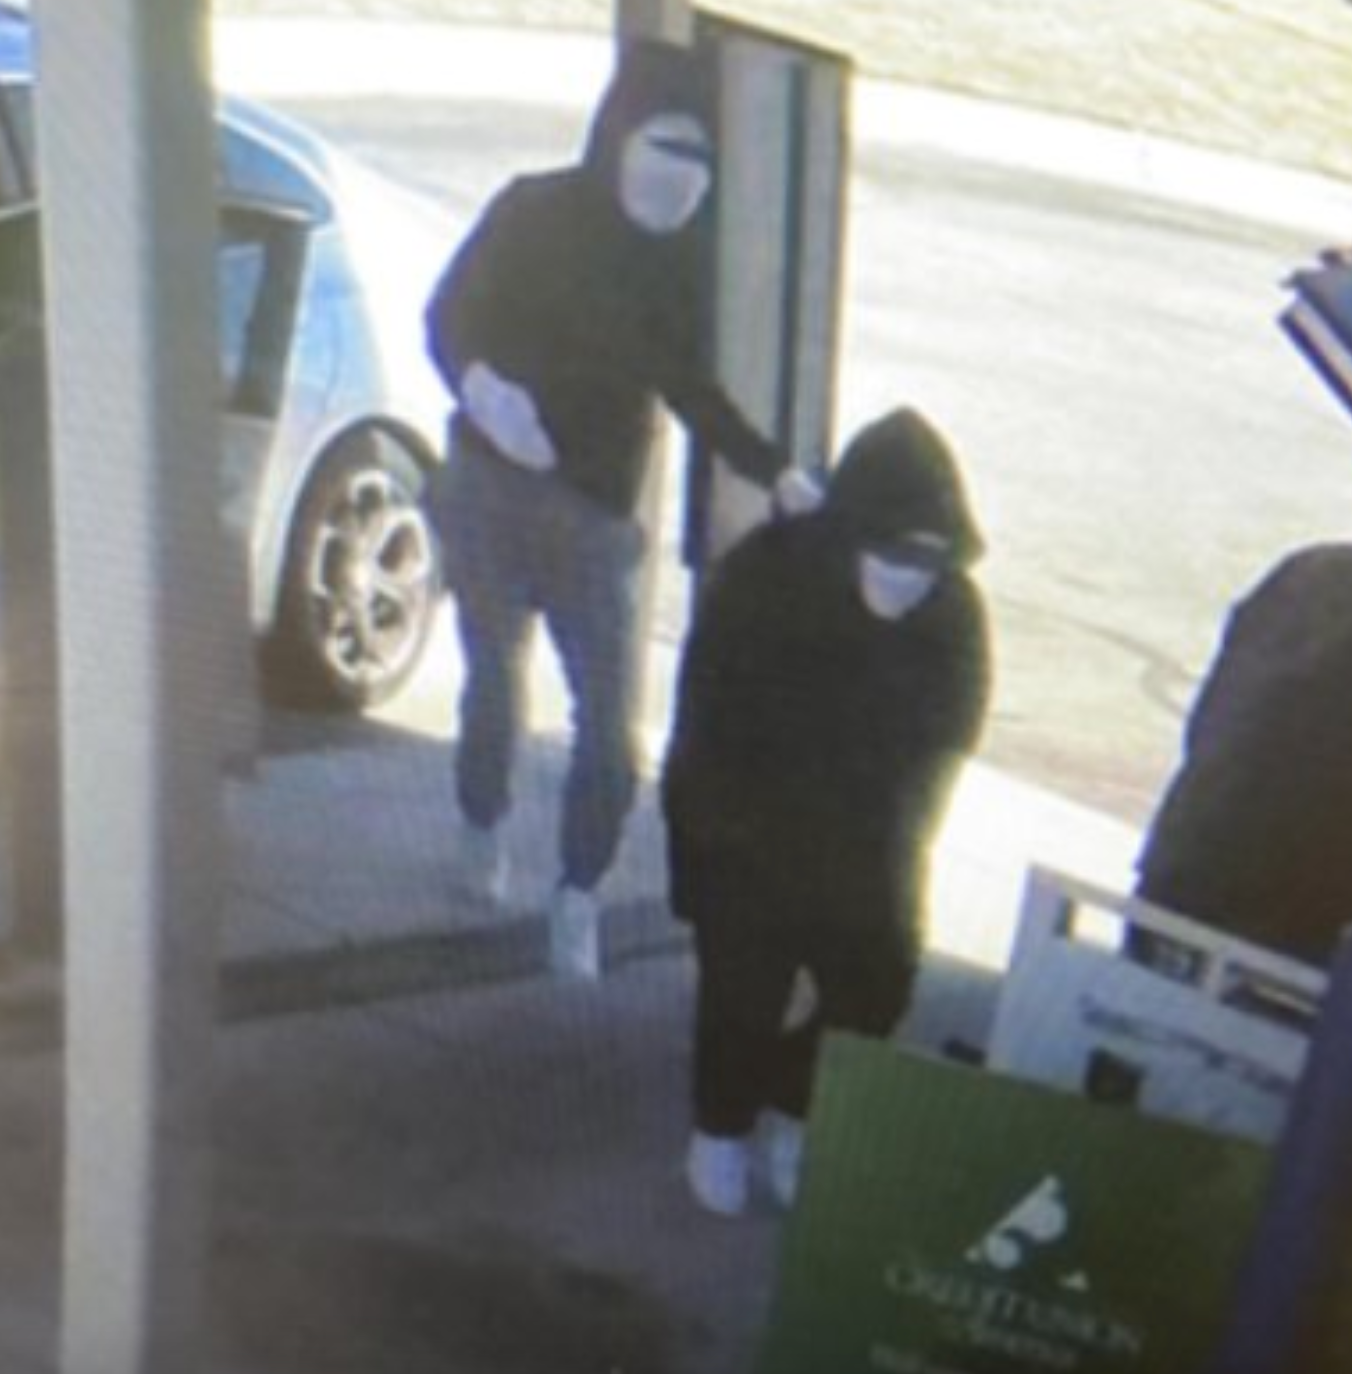  Teen among suspects accused in Kansas bank robbery 